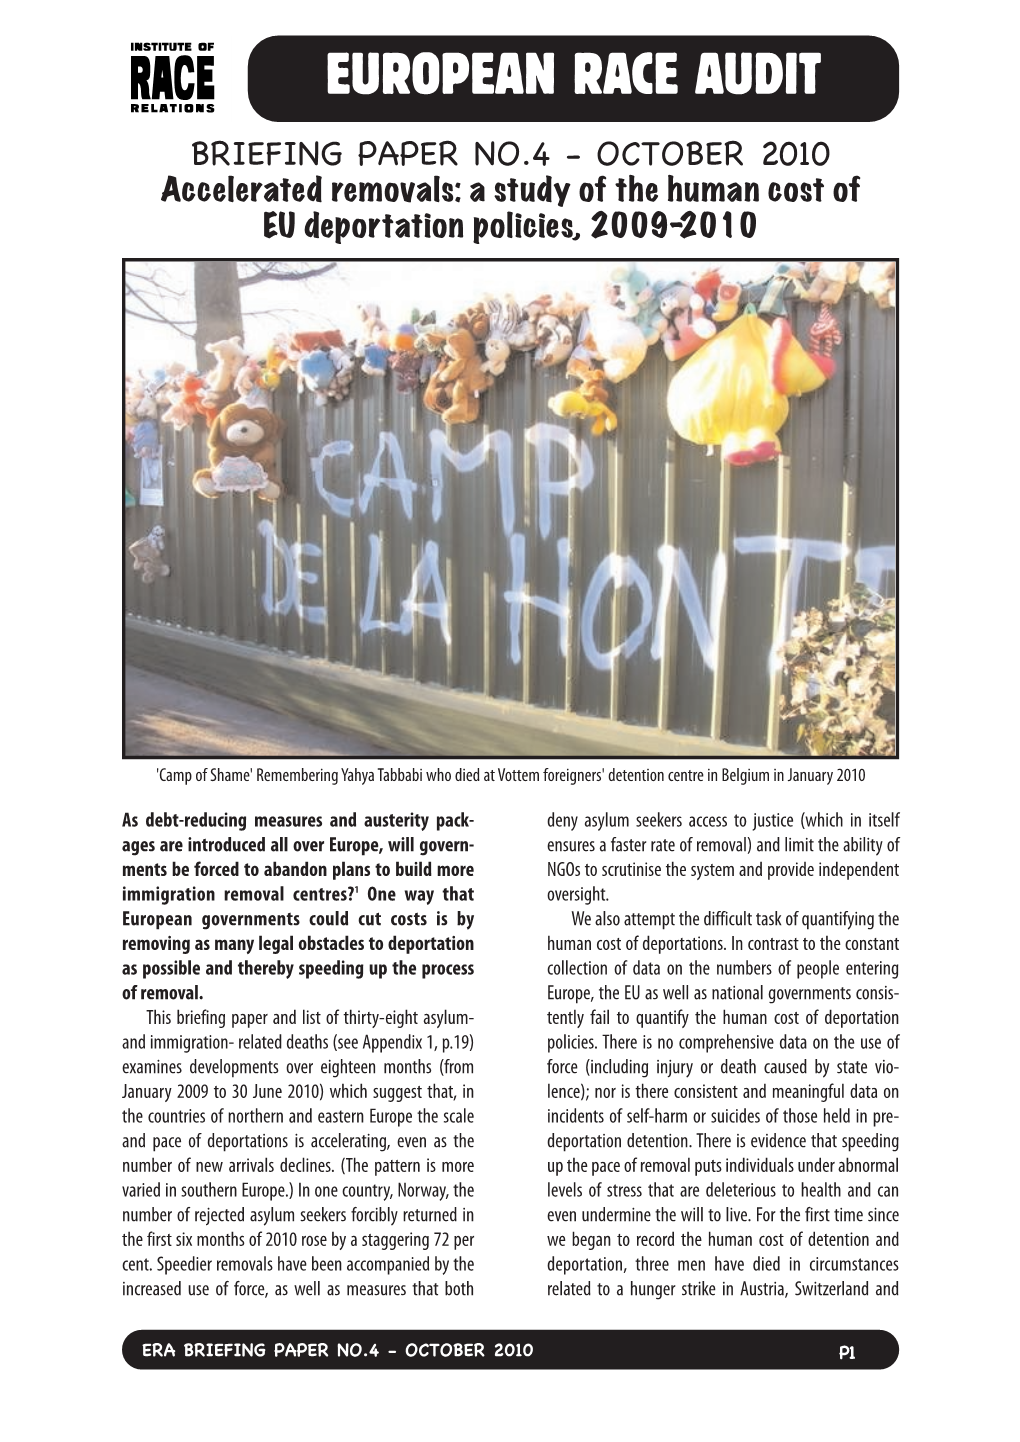 A Study of the Human Cost of EU Deportation Policies, 2009-2010